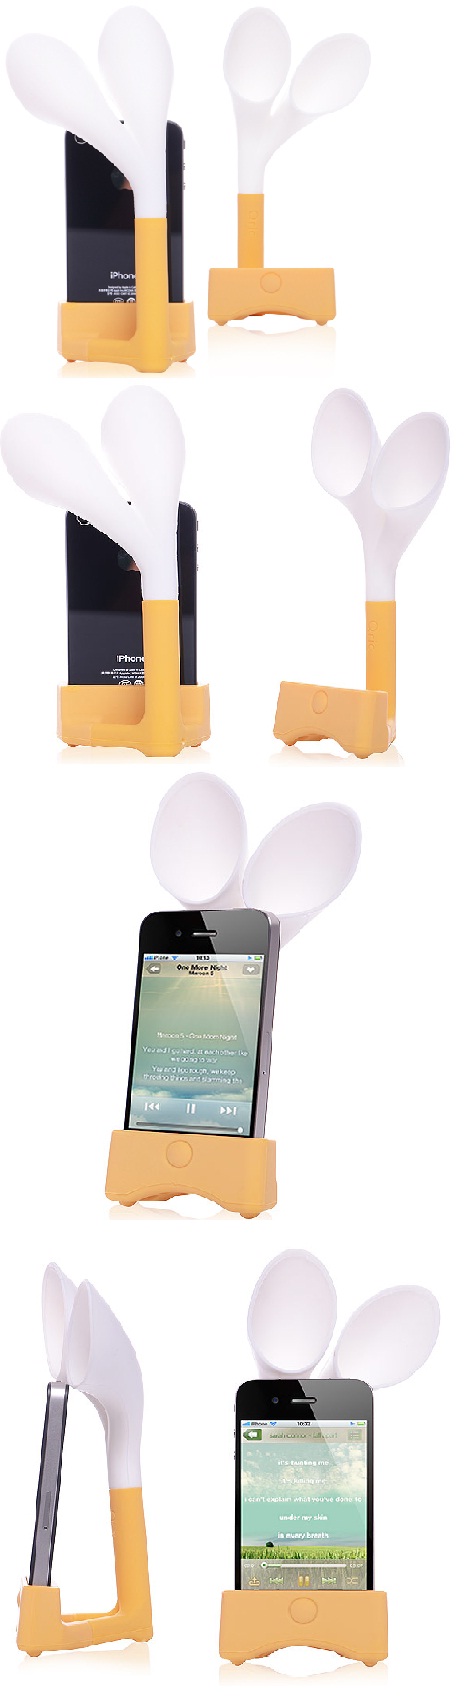 50% Discount Speakers for iPhone 